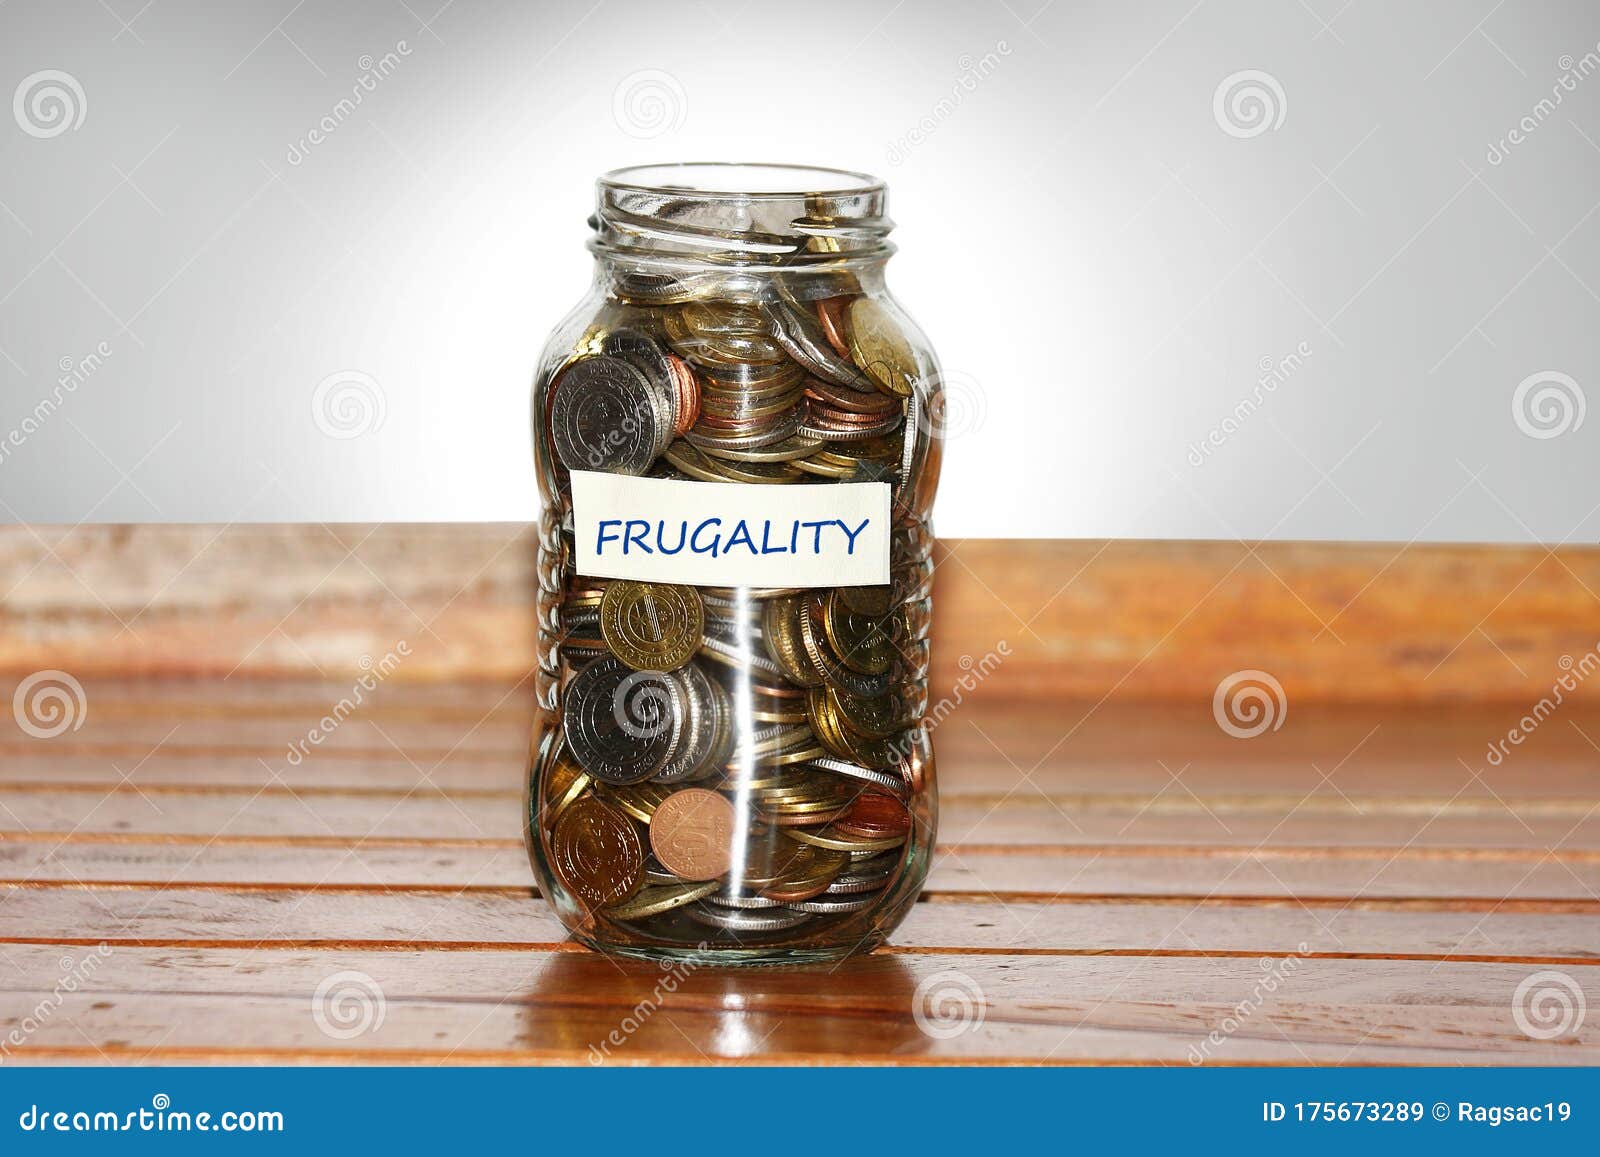 a glass jar full of coins to represents frugality